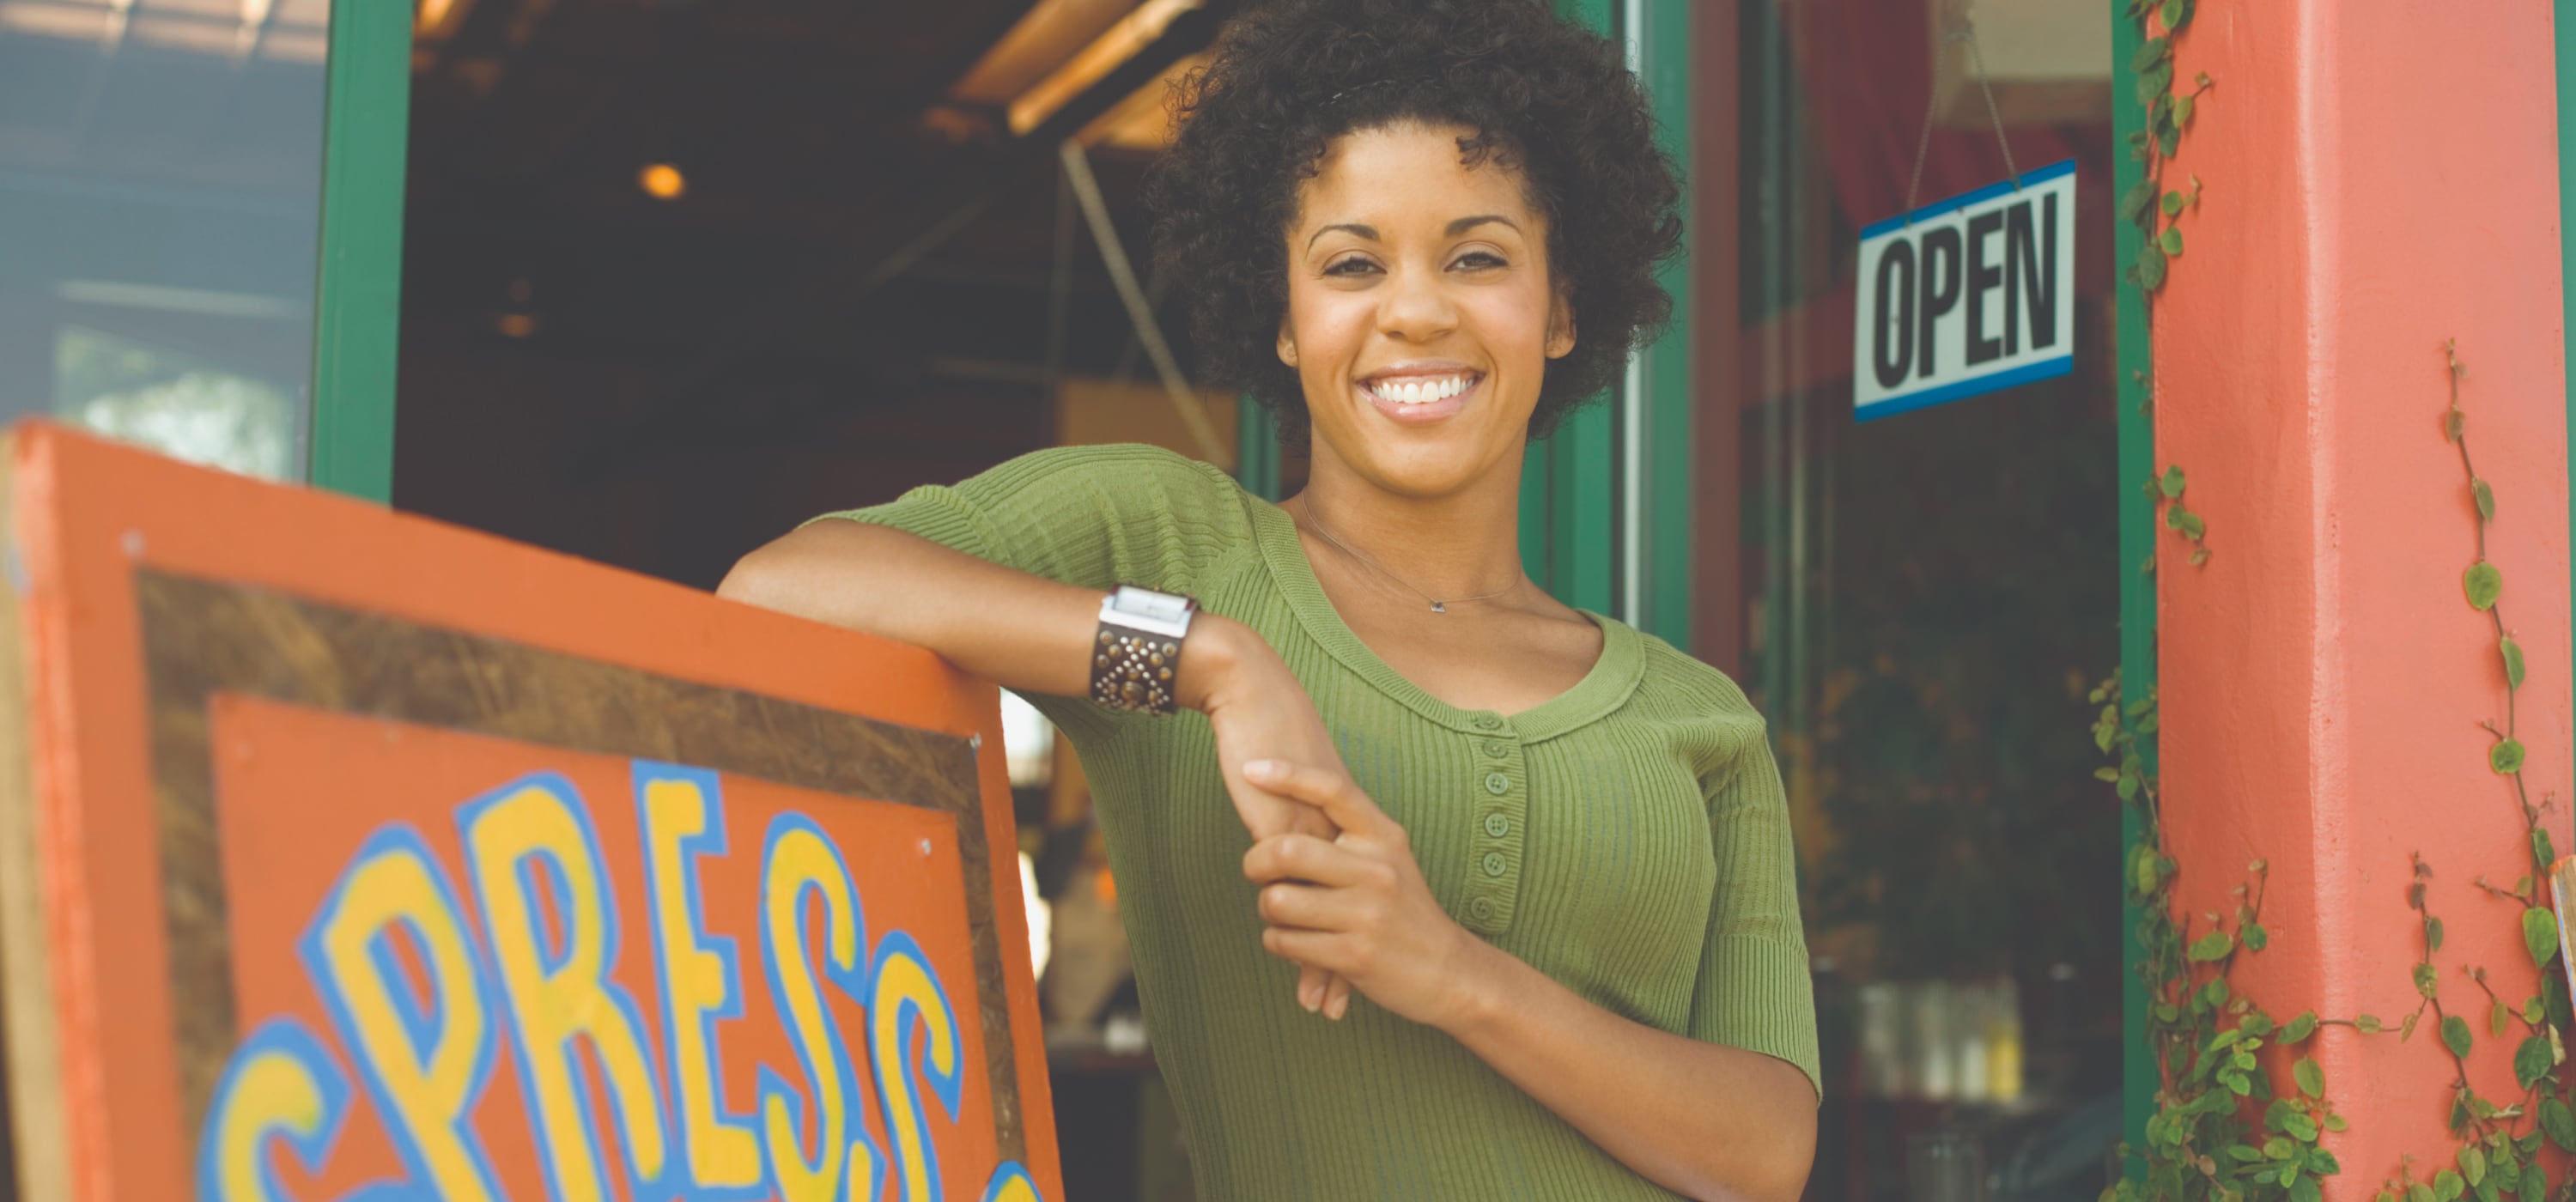 Black woman leaning against a shop sign 